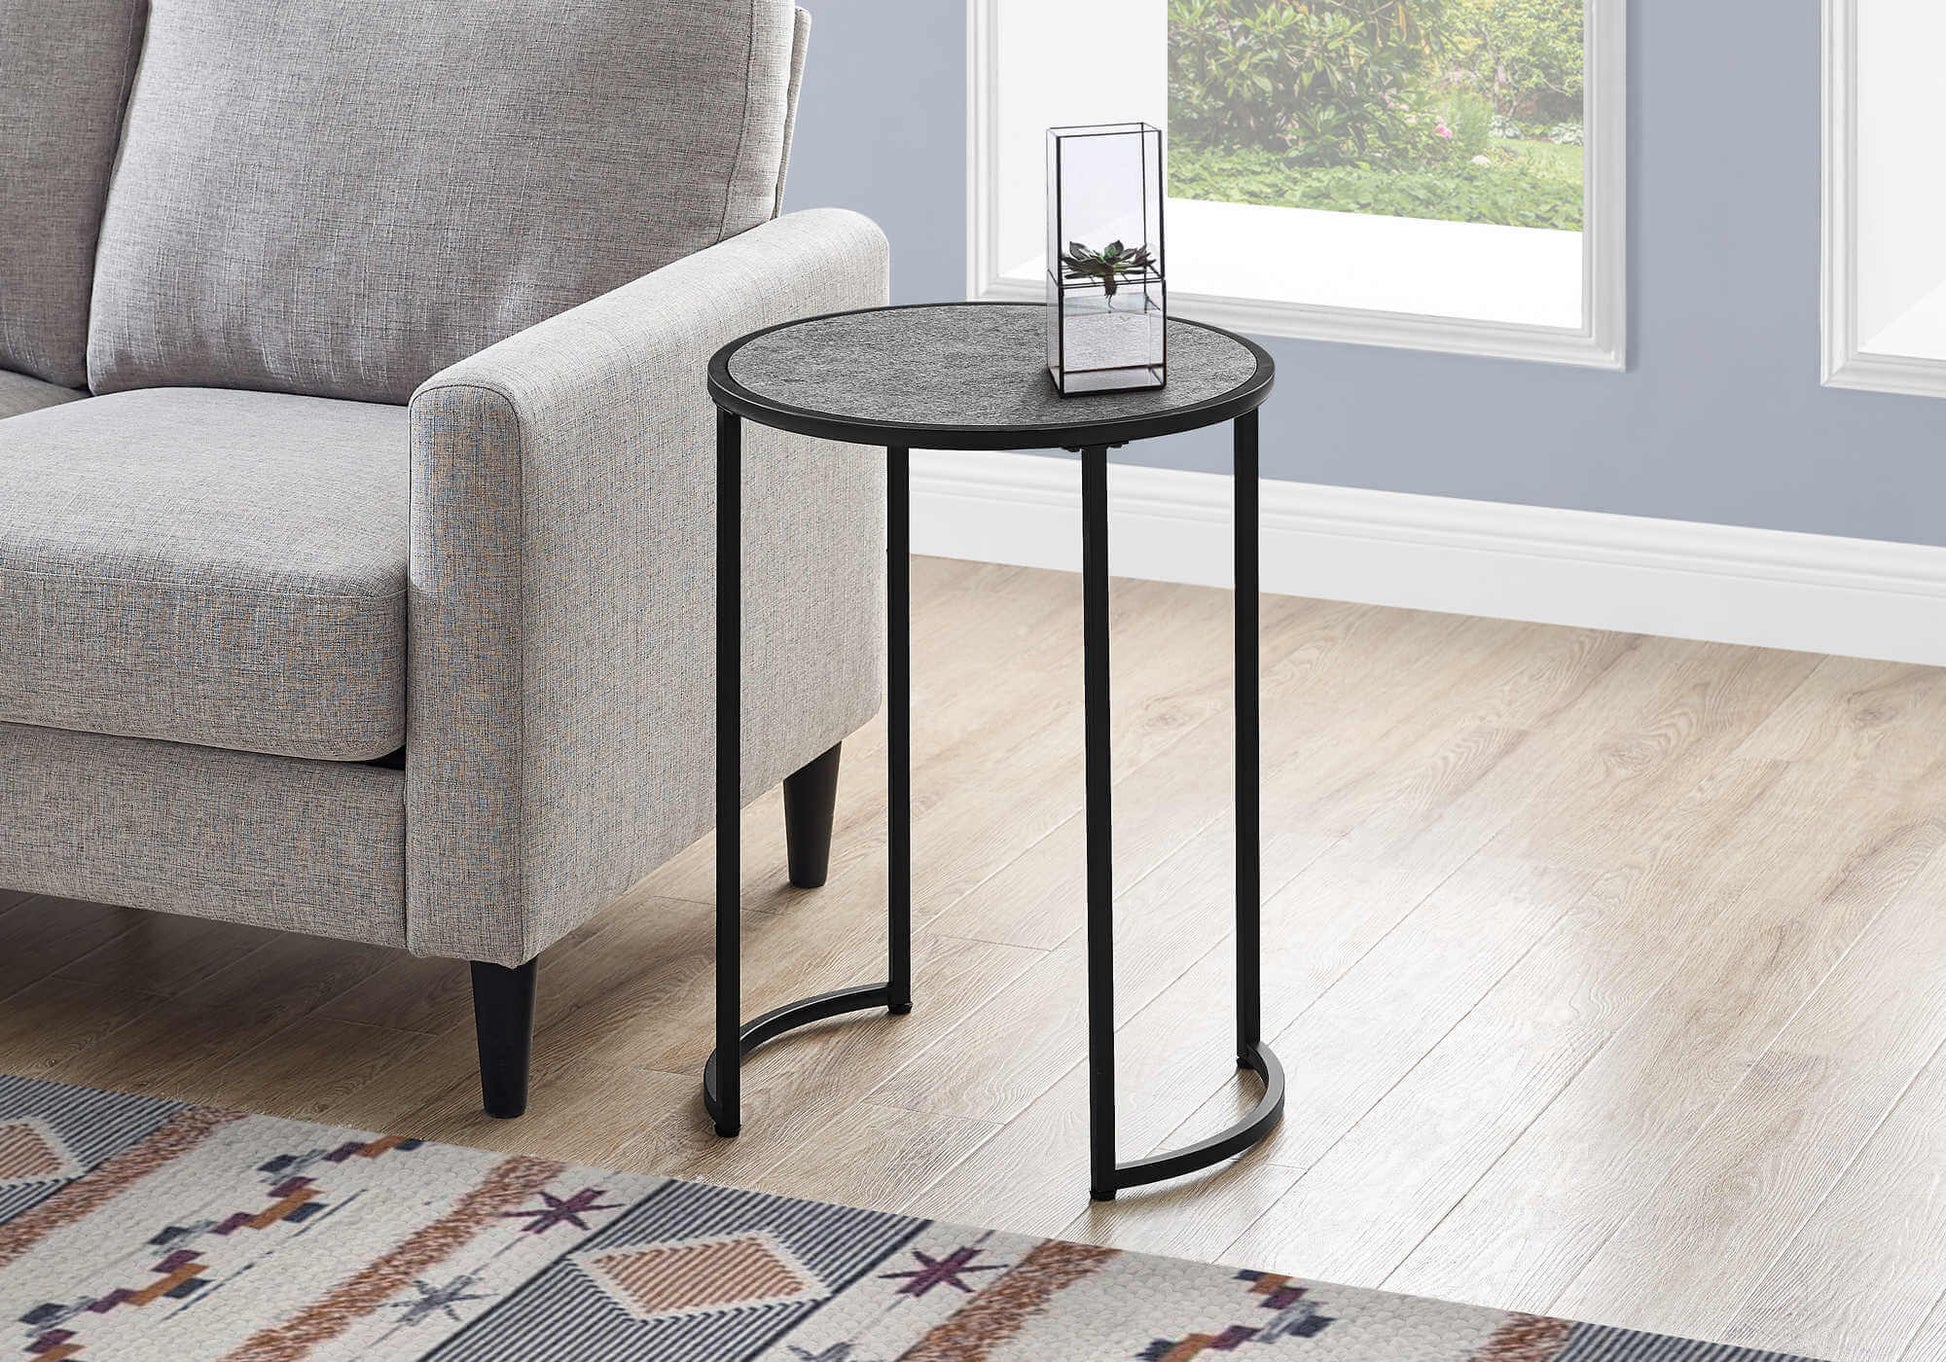 Monarch Specialties - 18.25"Dia/24"H Modern Laminate Bedroom Accent Table with Metal Frame - I 2206